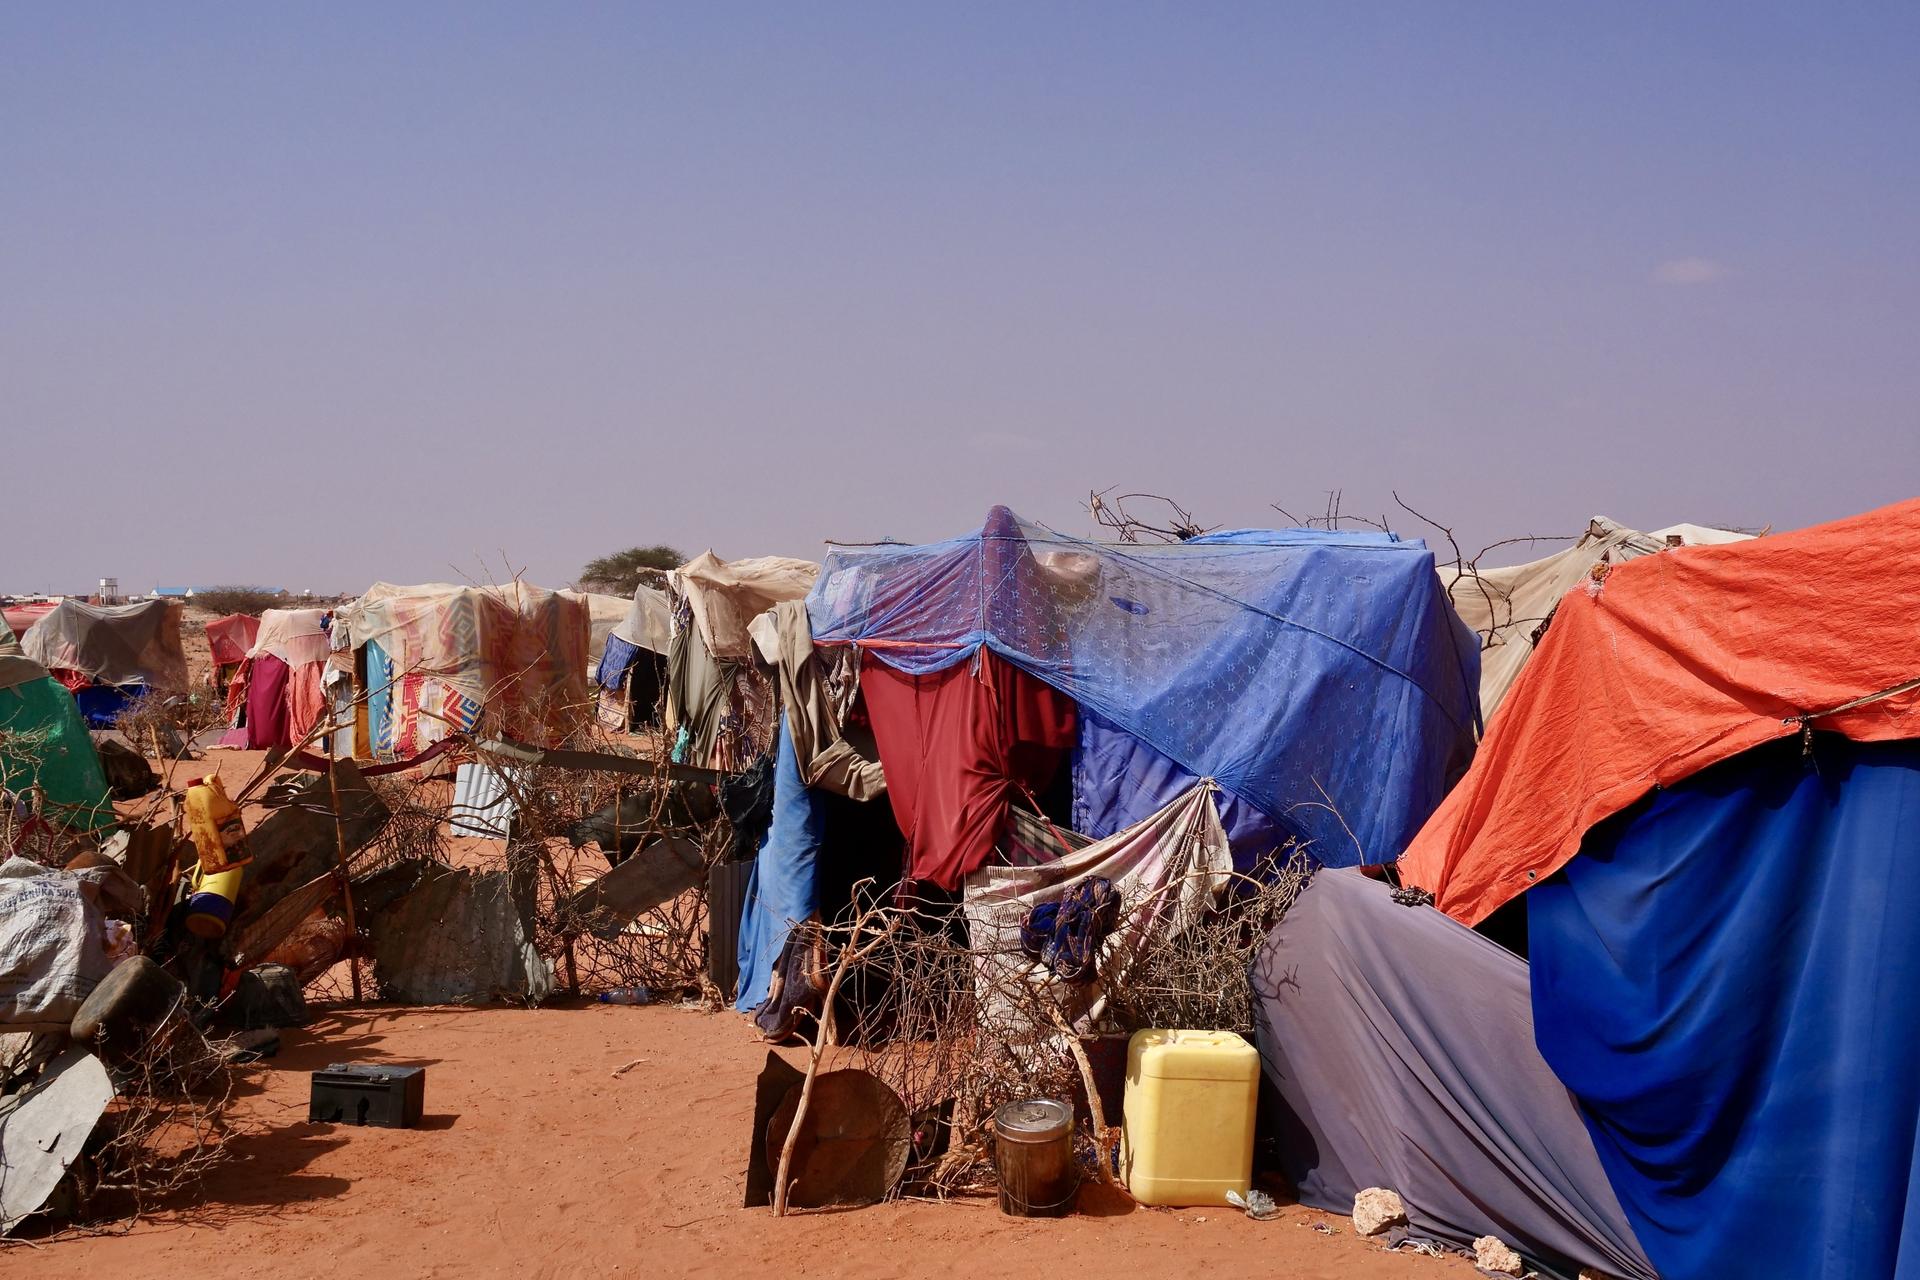 Makeshift homes at an IDP camp in Galkayo, Somalia, where people have come in search of food and water amid the ongoing drought.